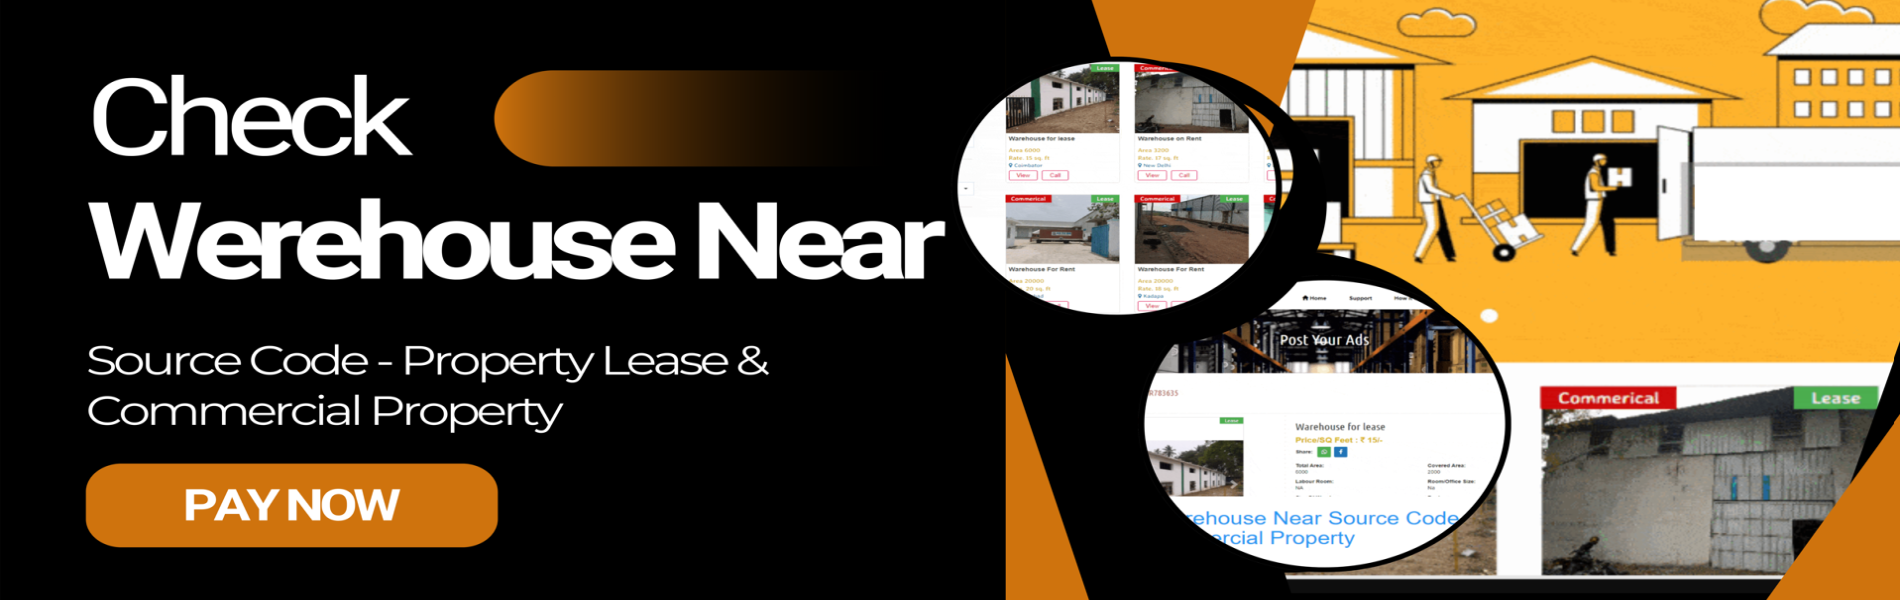 Check Werehouse Near Source Code - Property Lease & Commercial Property